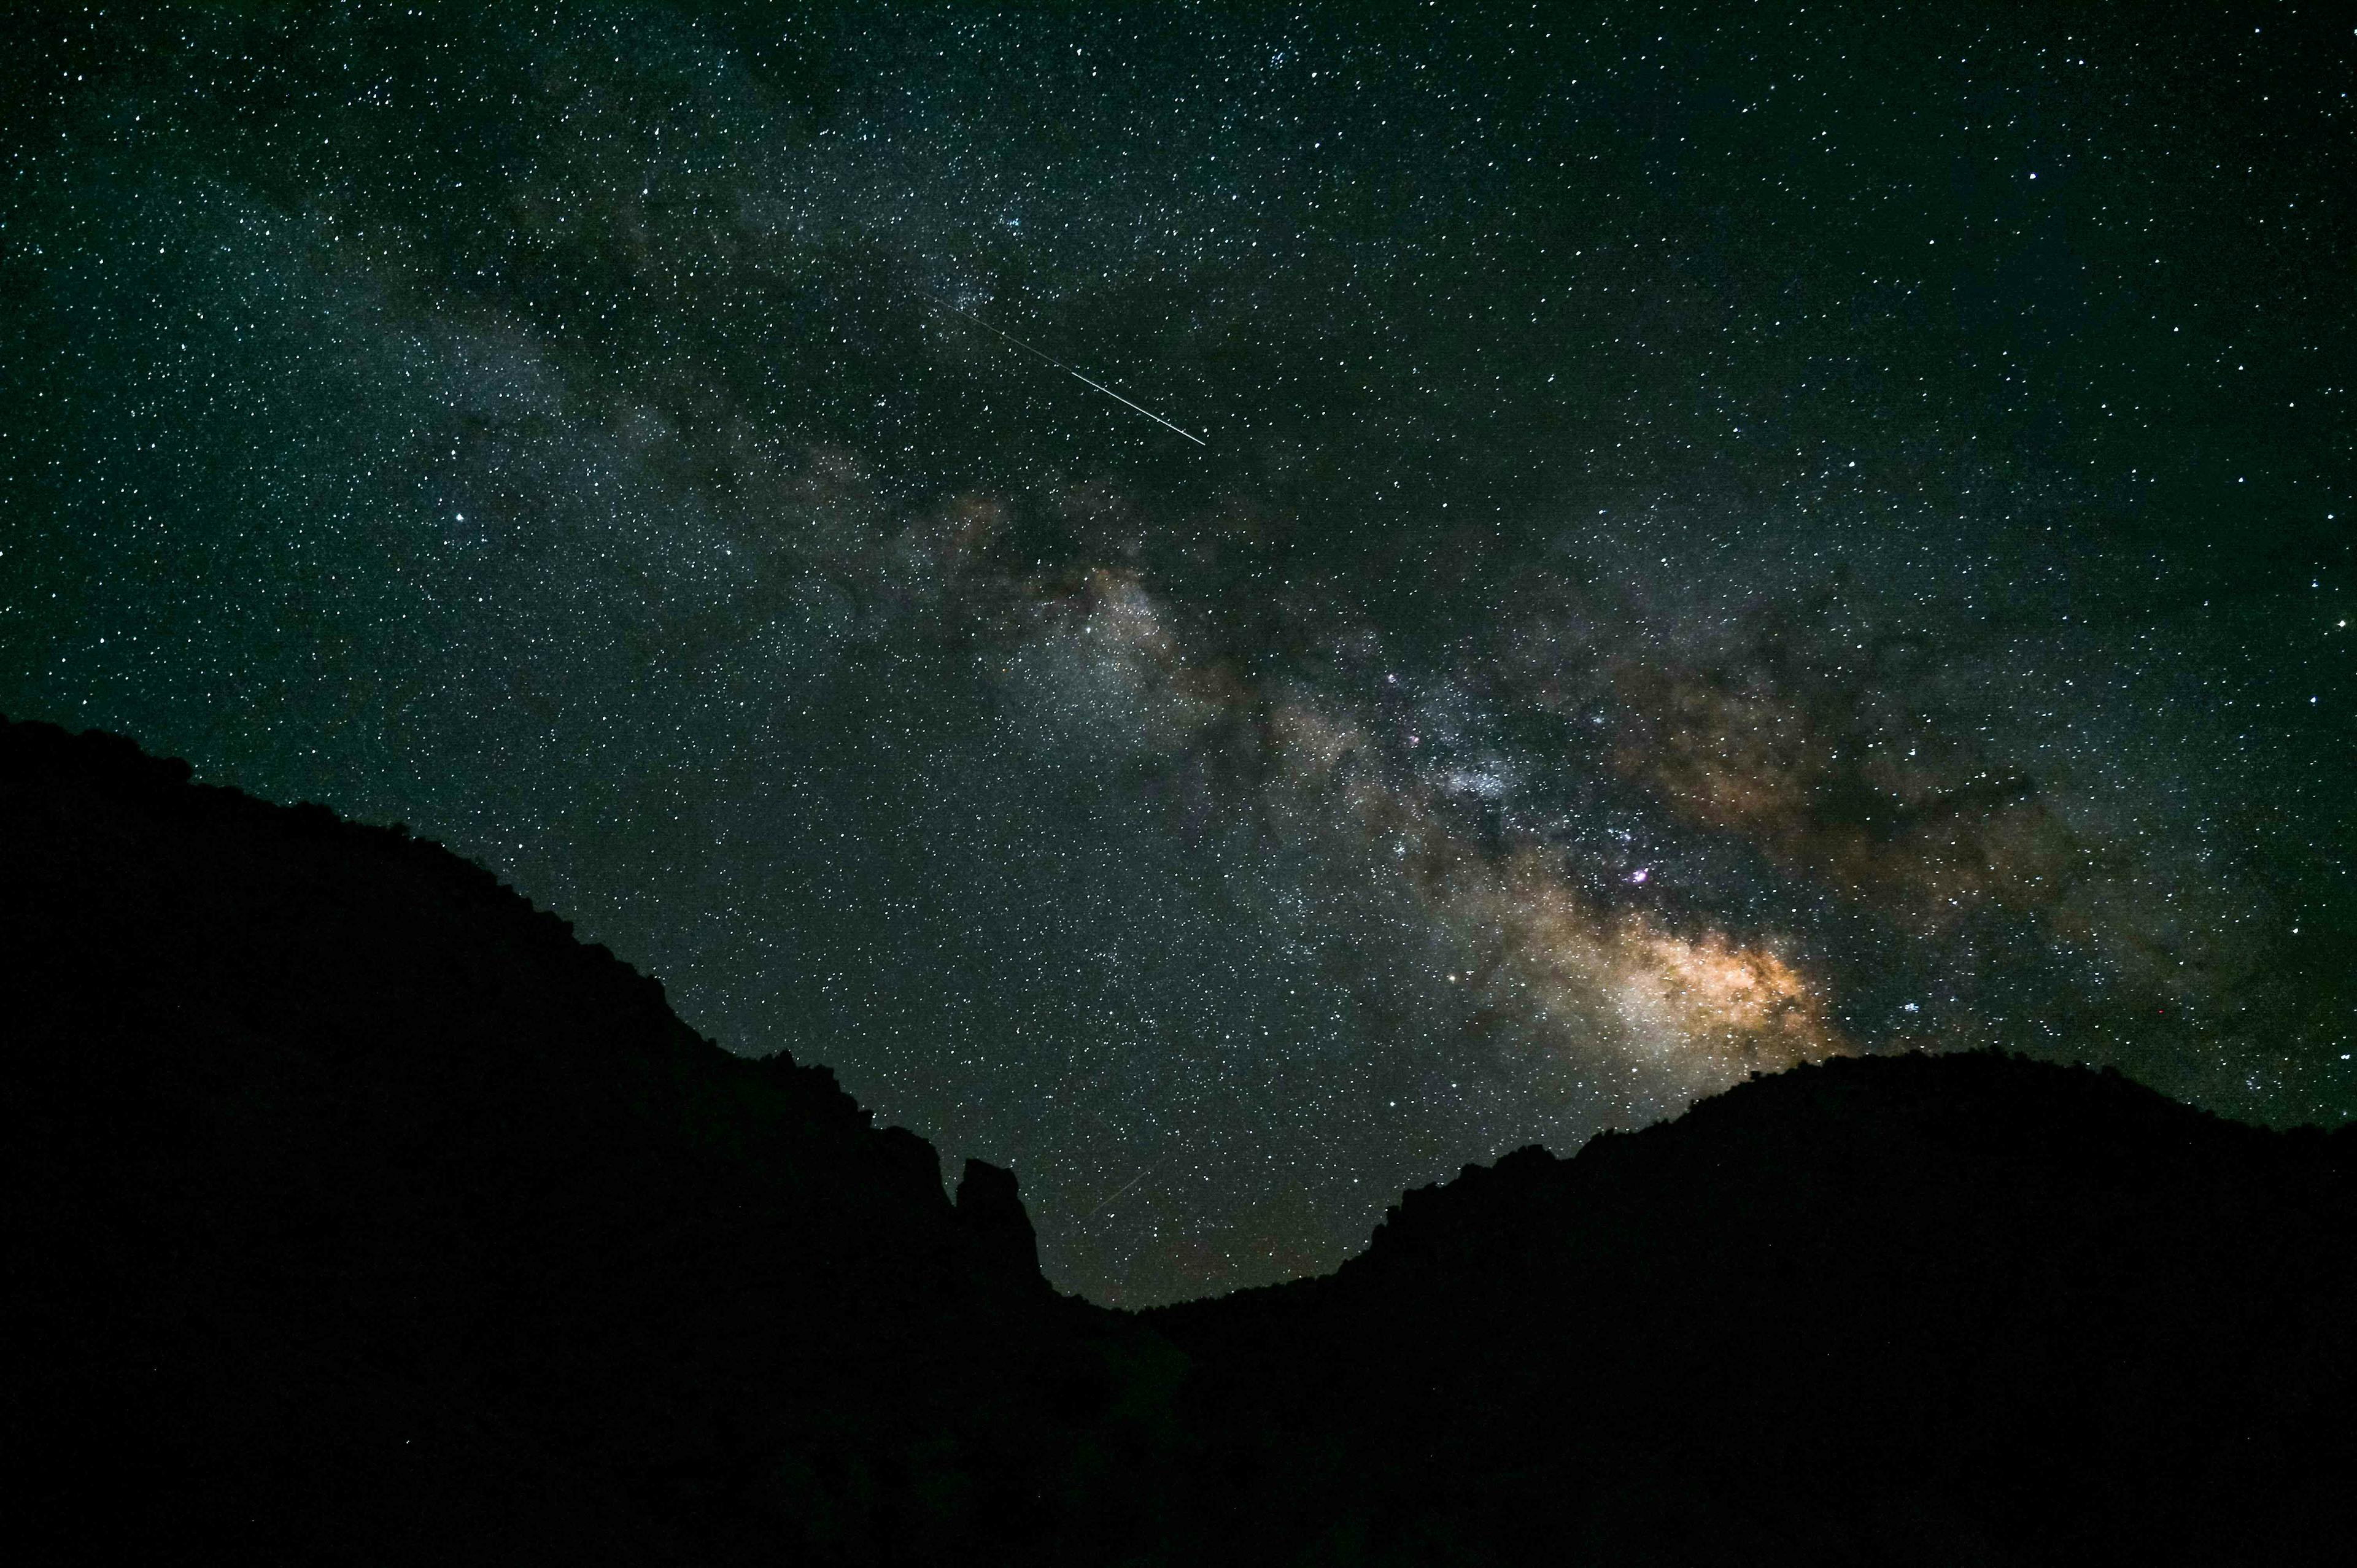 The milky way stretches over some hills in Utah